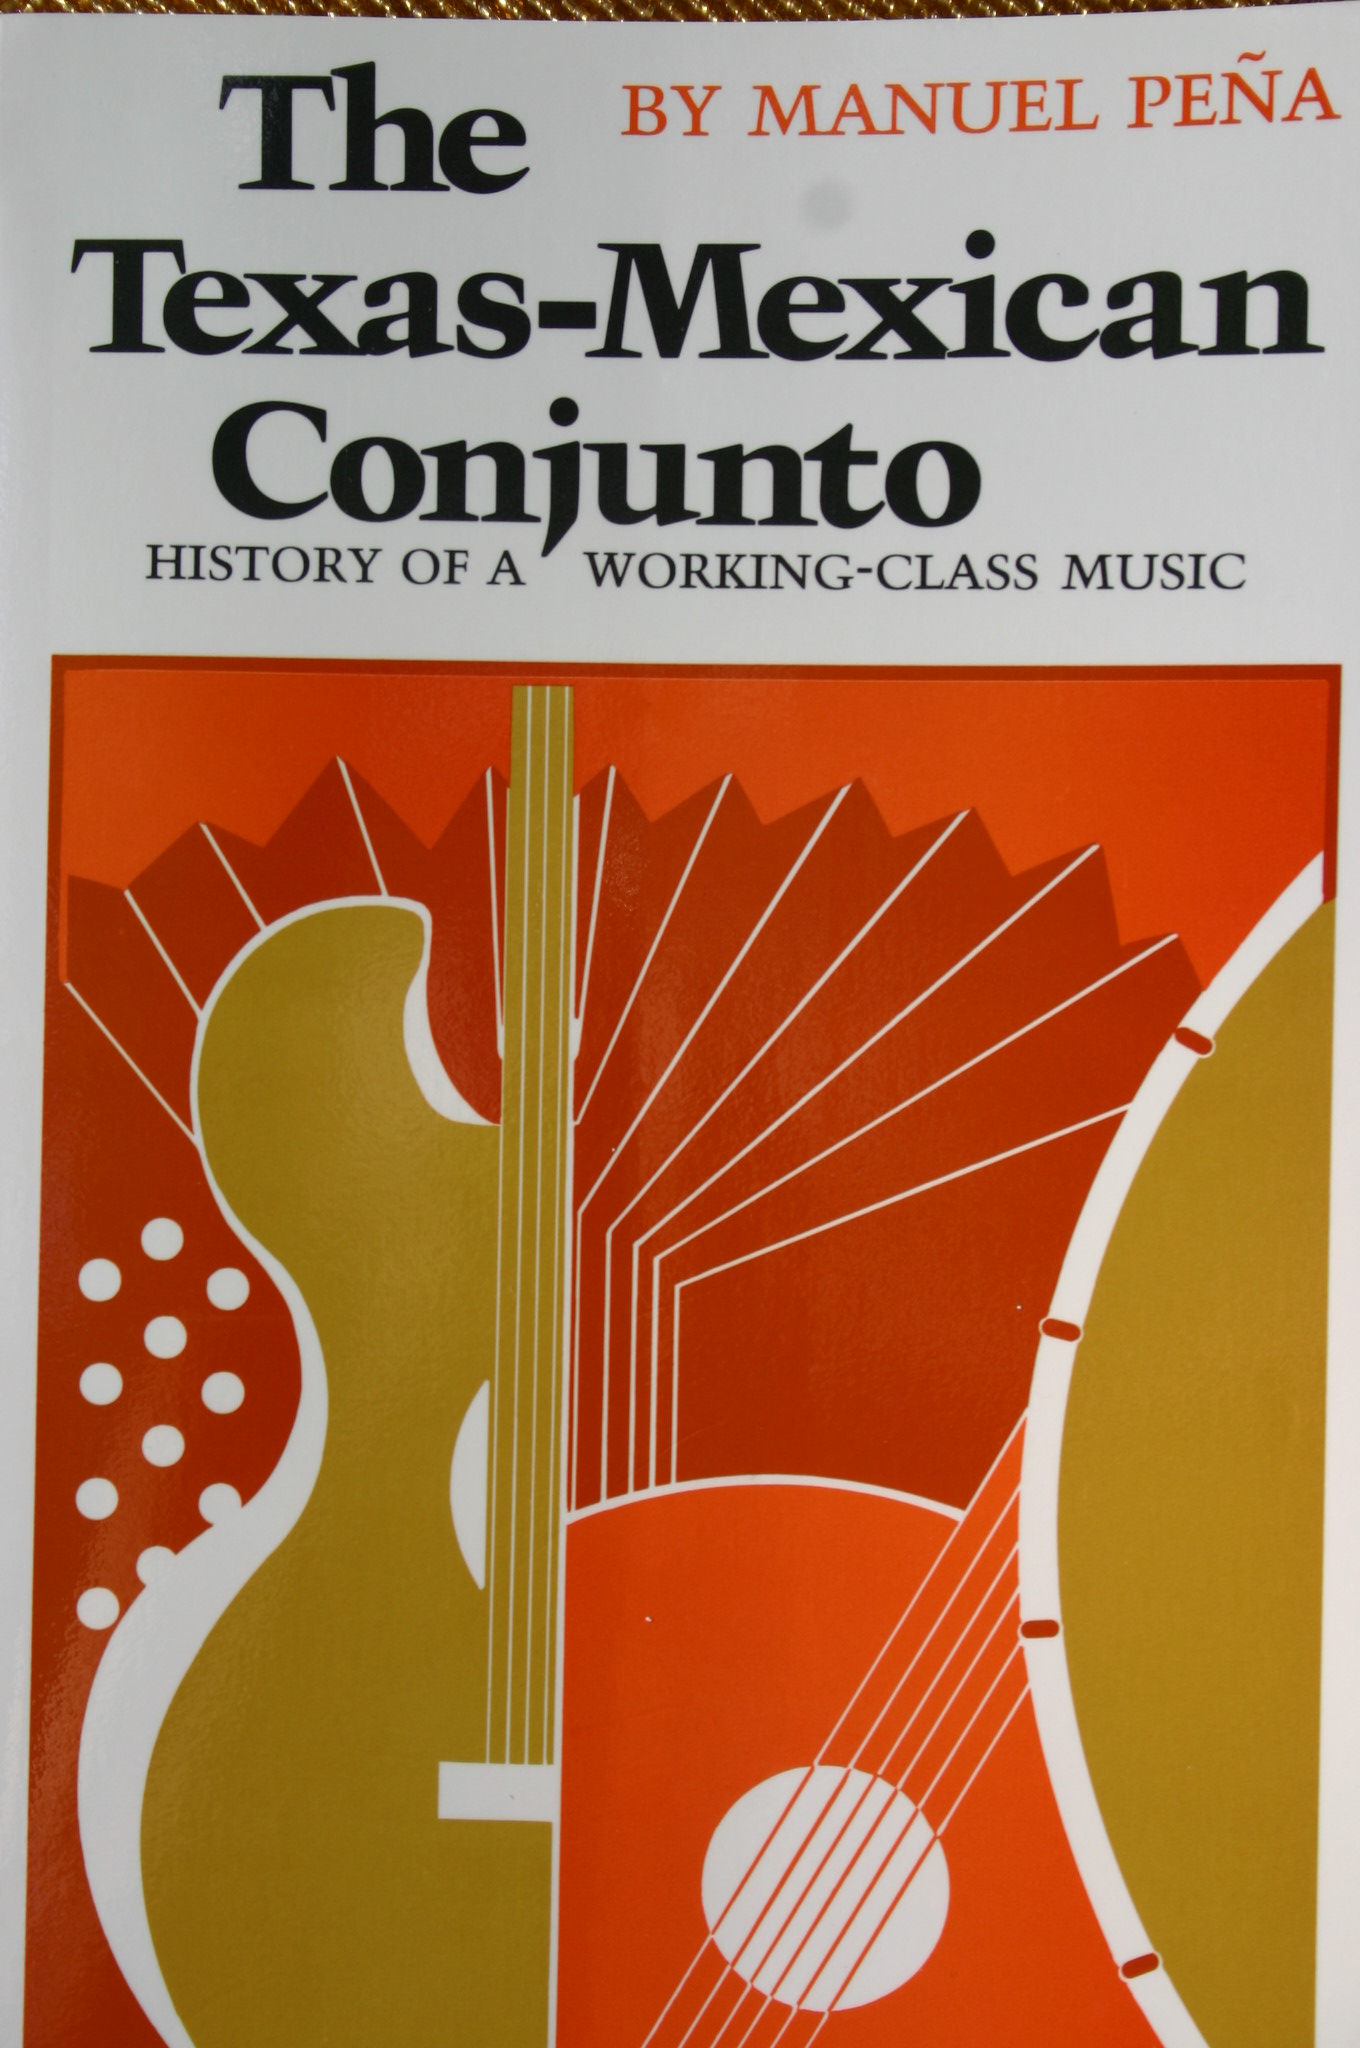 The Texas-Mexican Conjunto: History of a Working-Class Music by Manuel Pena